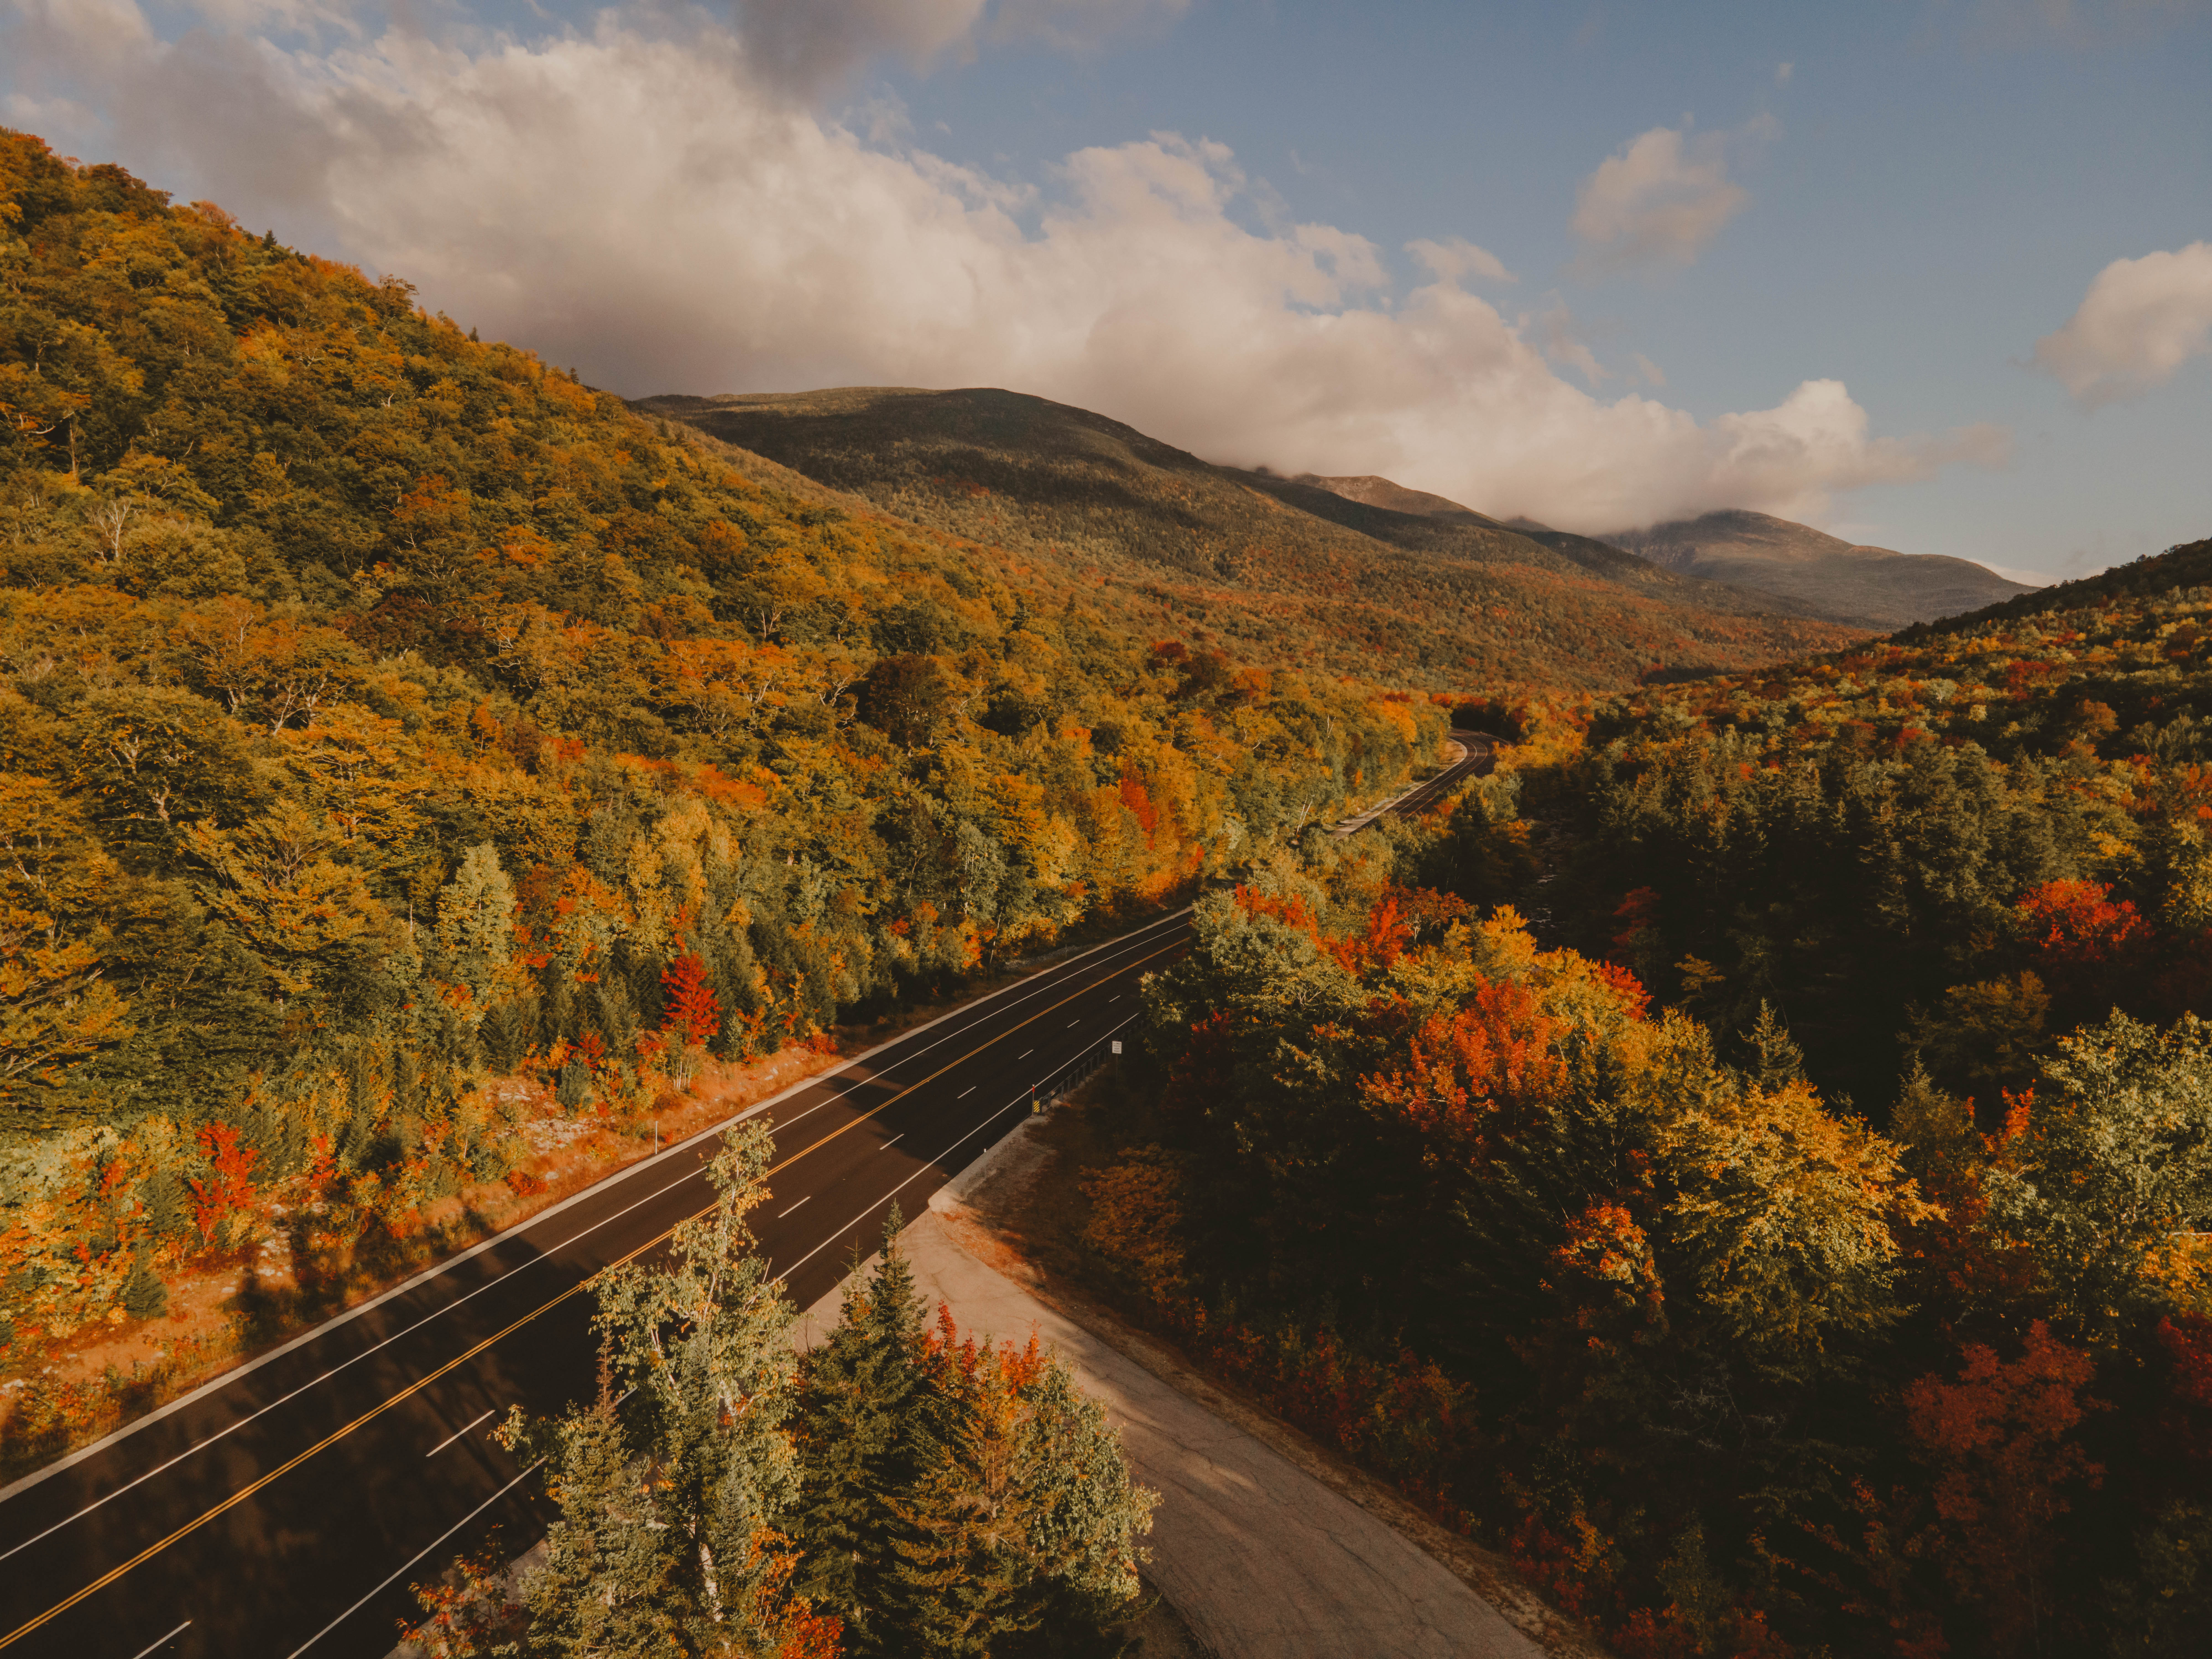 A complete guide to eloping in the White Mountains of NH include visiting during peak fall foliage.